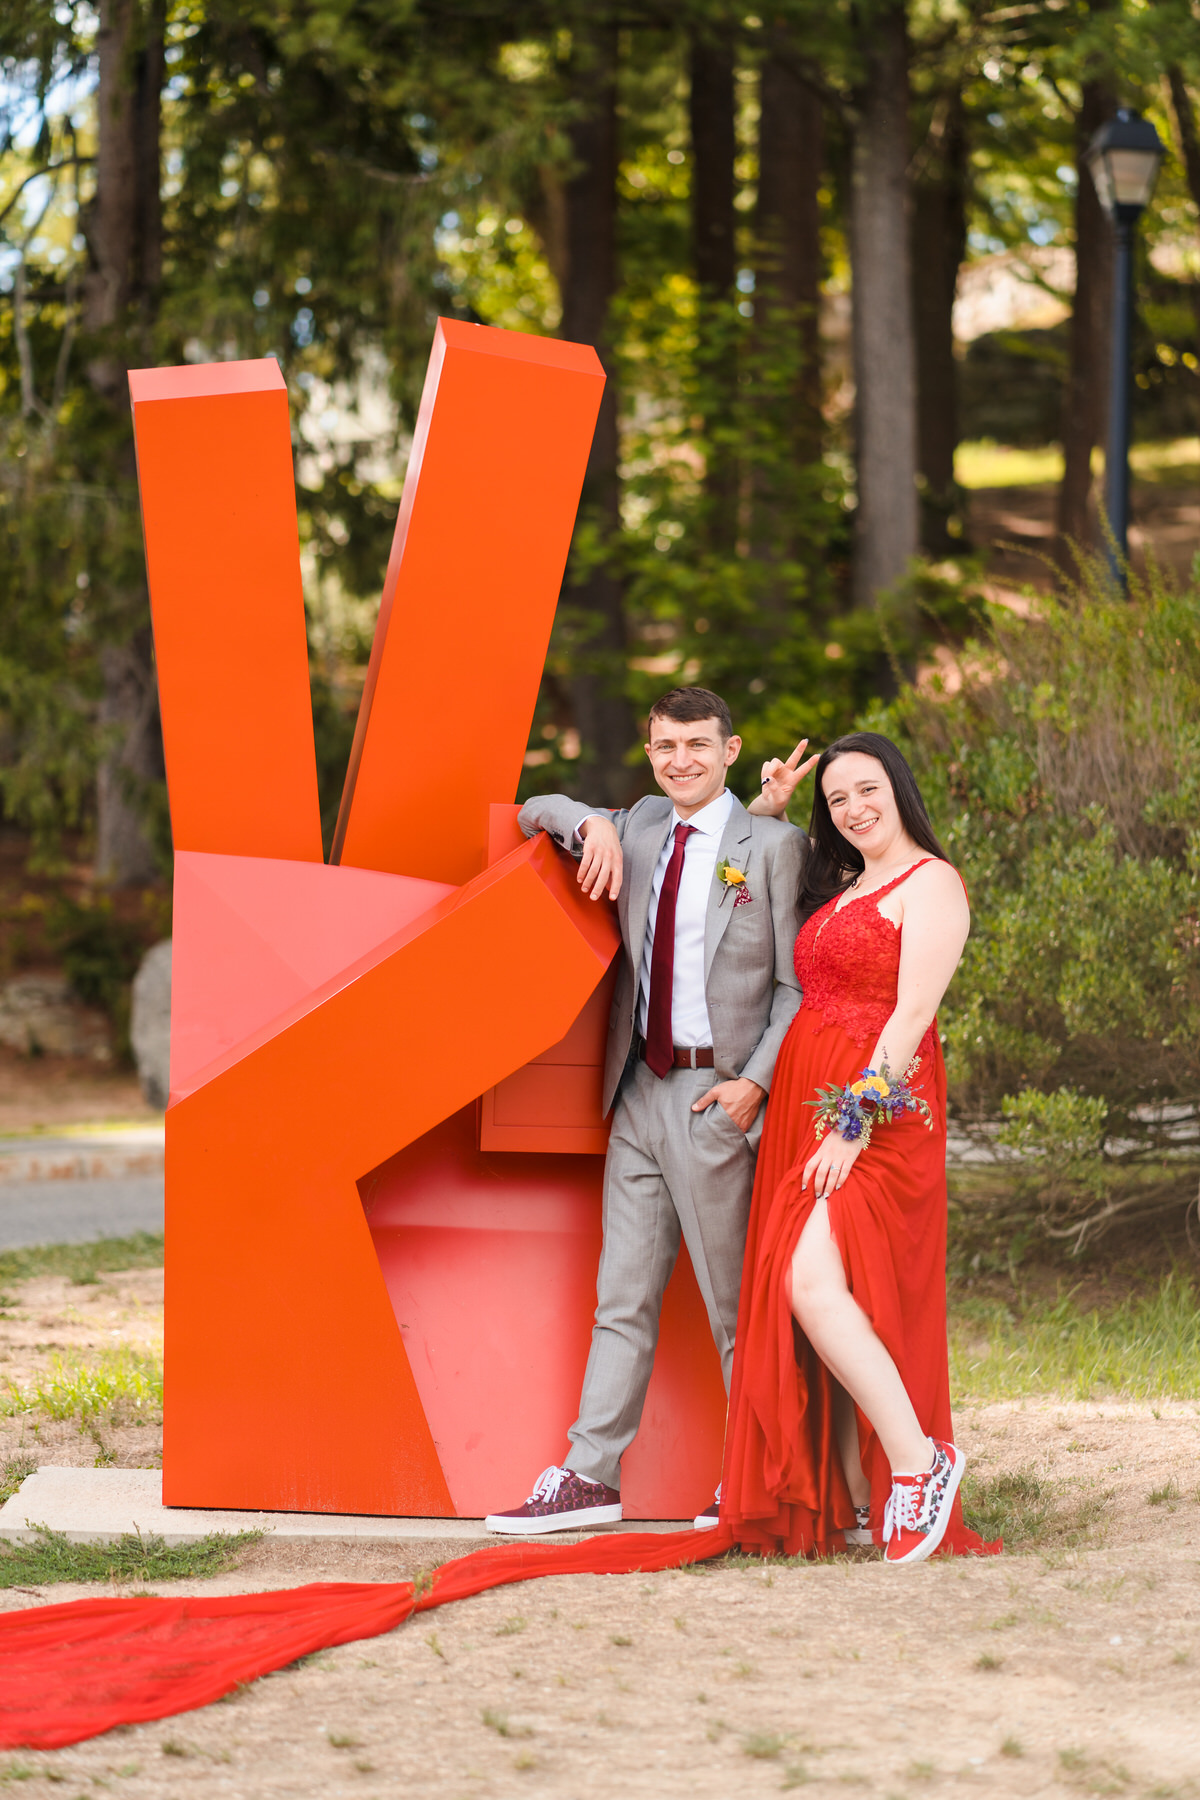 deCordova Sculpture Park and Museum wedding by nicole chan photography - non traditional jewish wedding